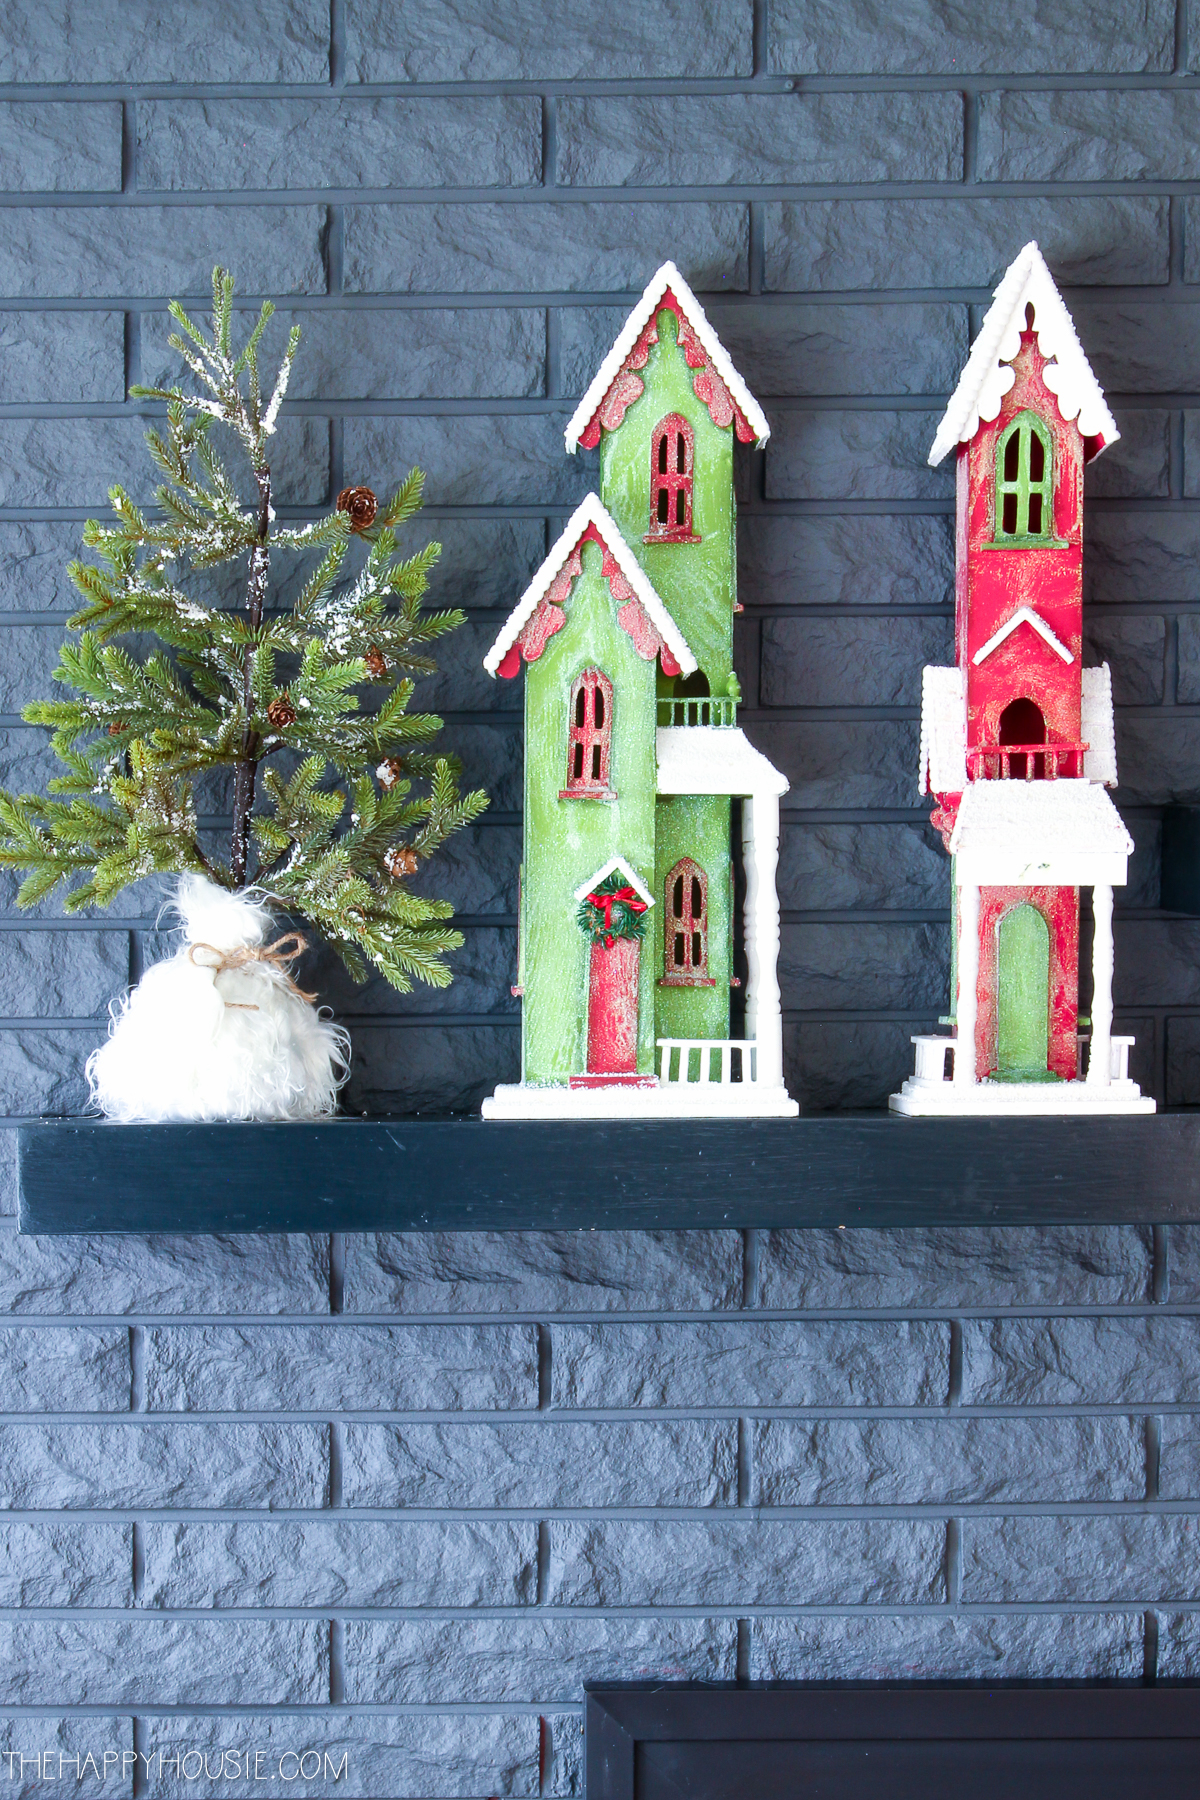 Up close of the village and mini Christmas tree on the shelf.